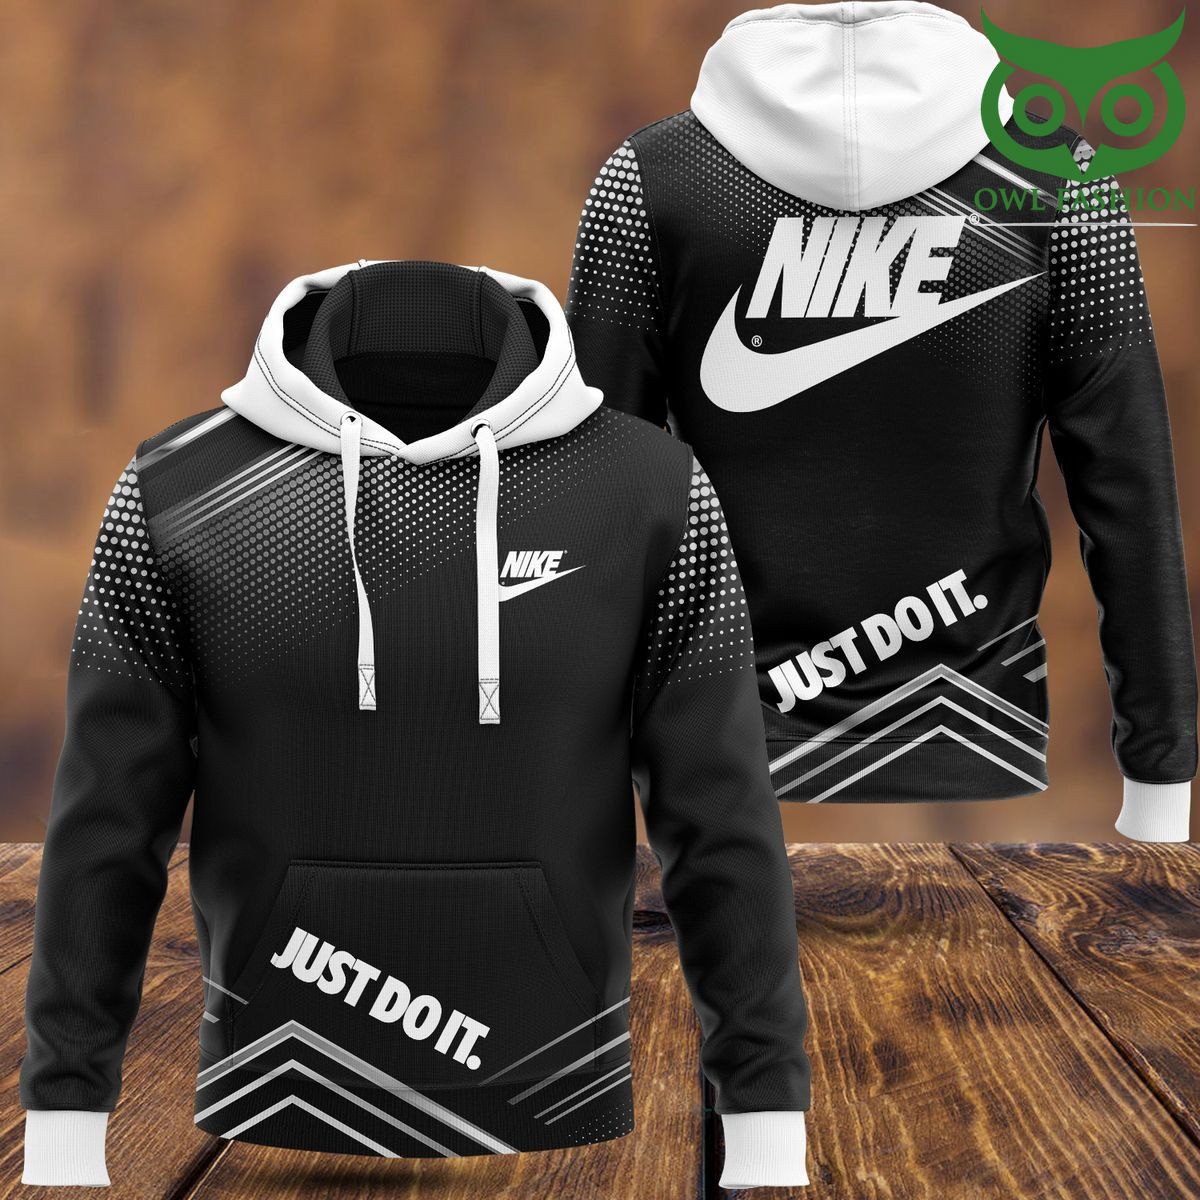 81 Nike Just do it white dot 3D Hoodie